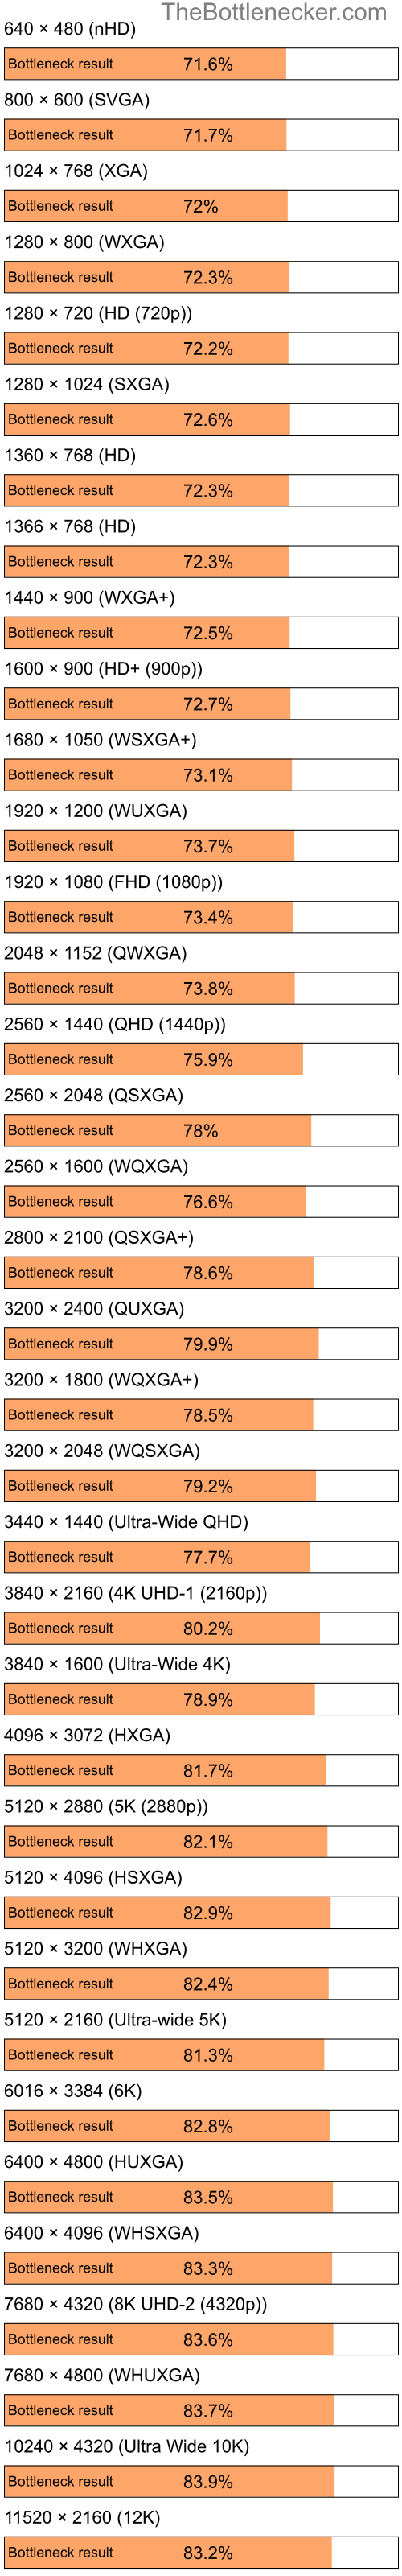 Bottleneck results by resolution for Intel Celeron M 420 and AMD Mobility Radeon 9700 in Processor Intense Tasks